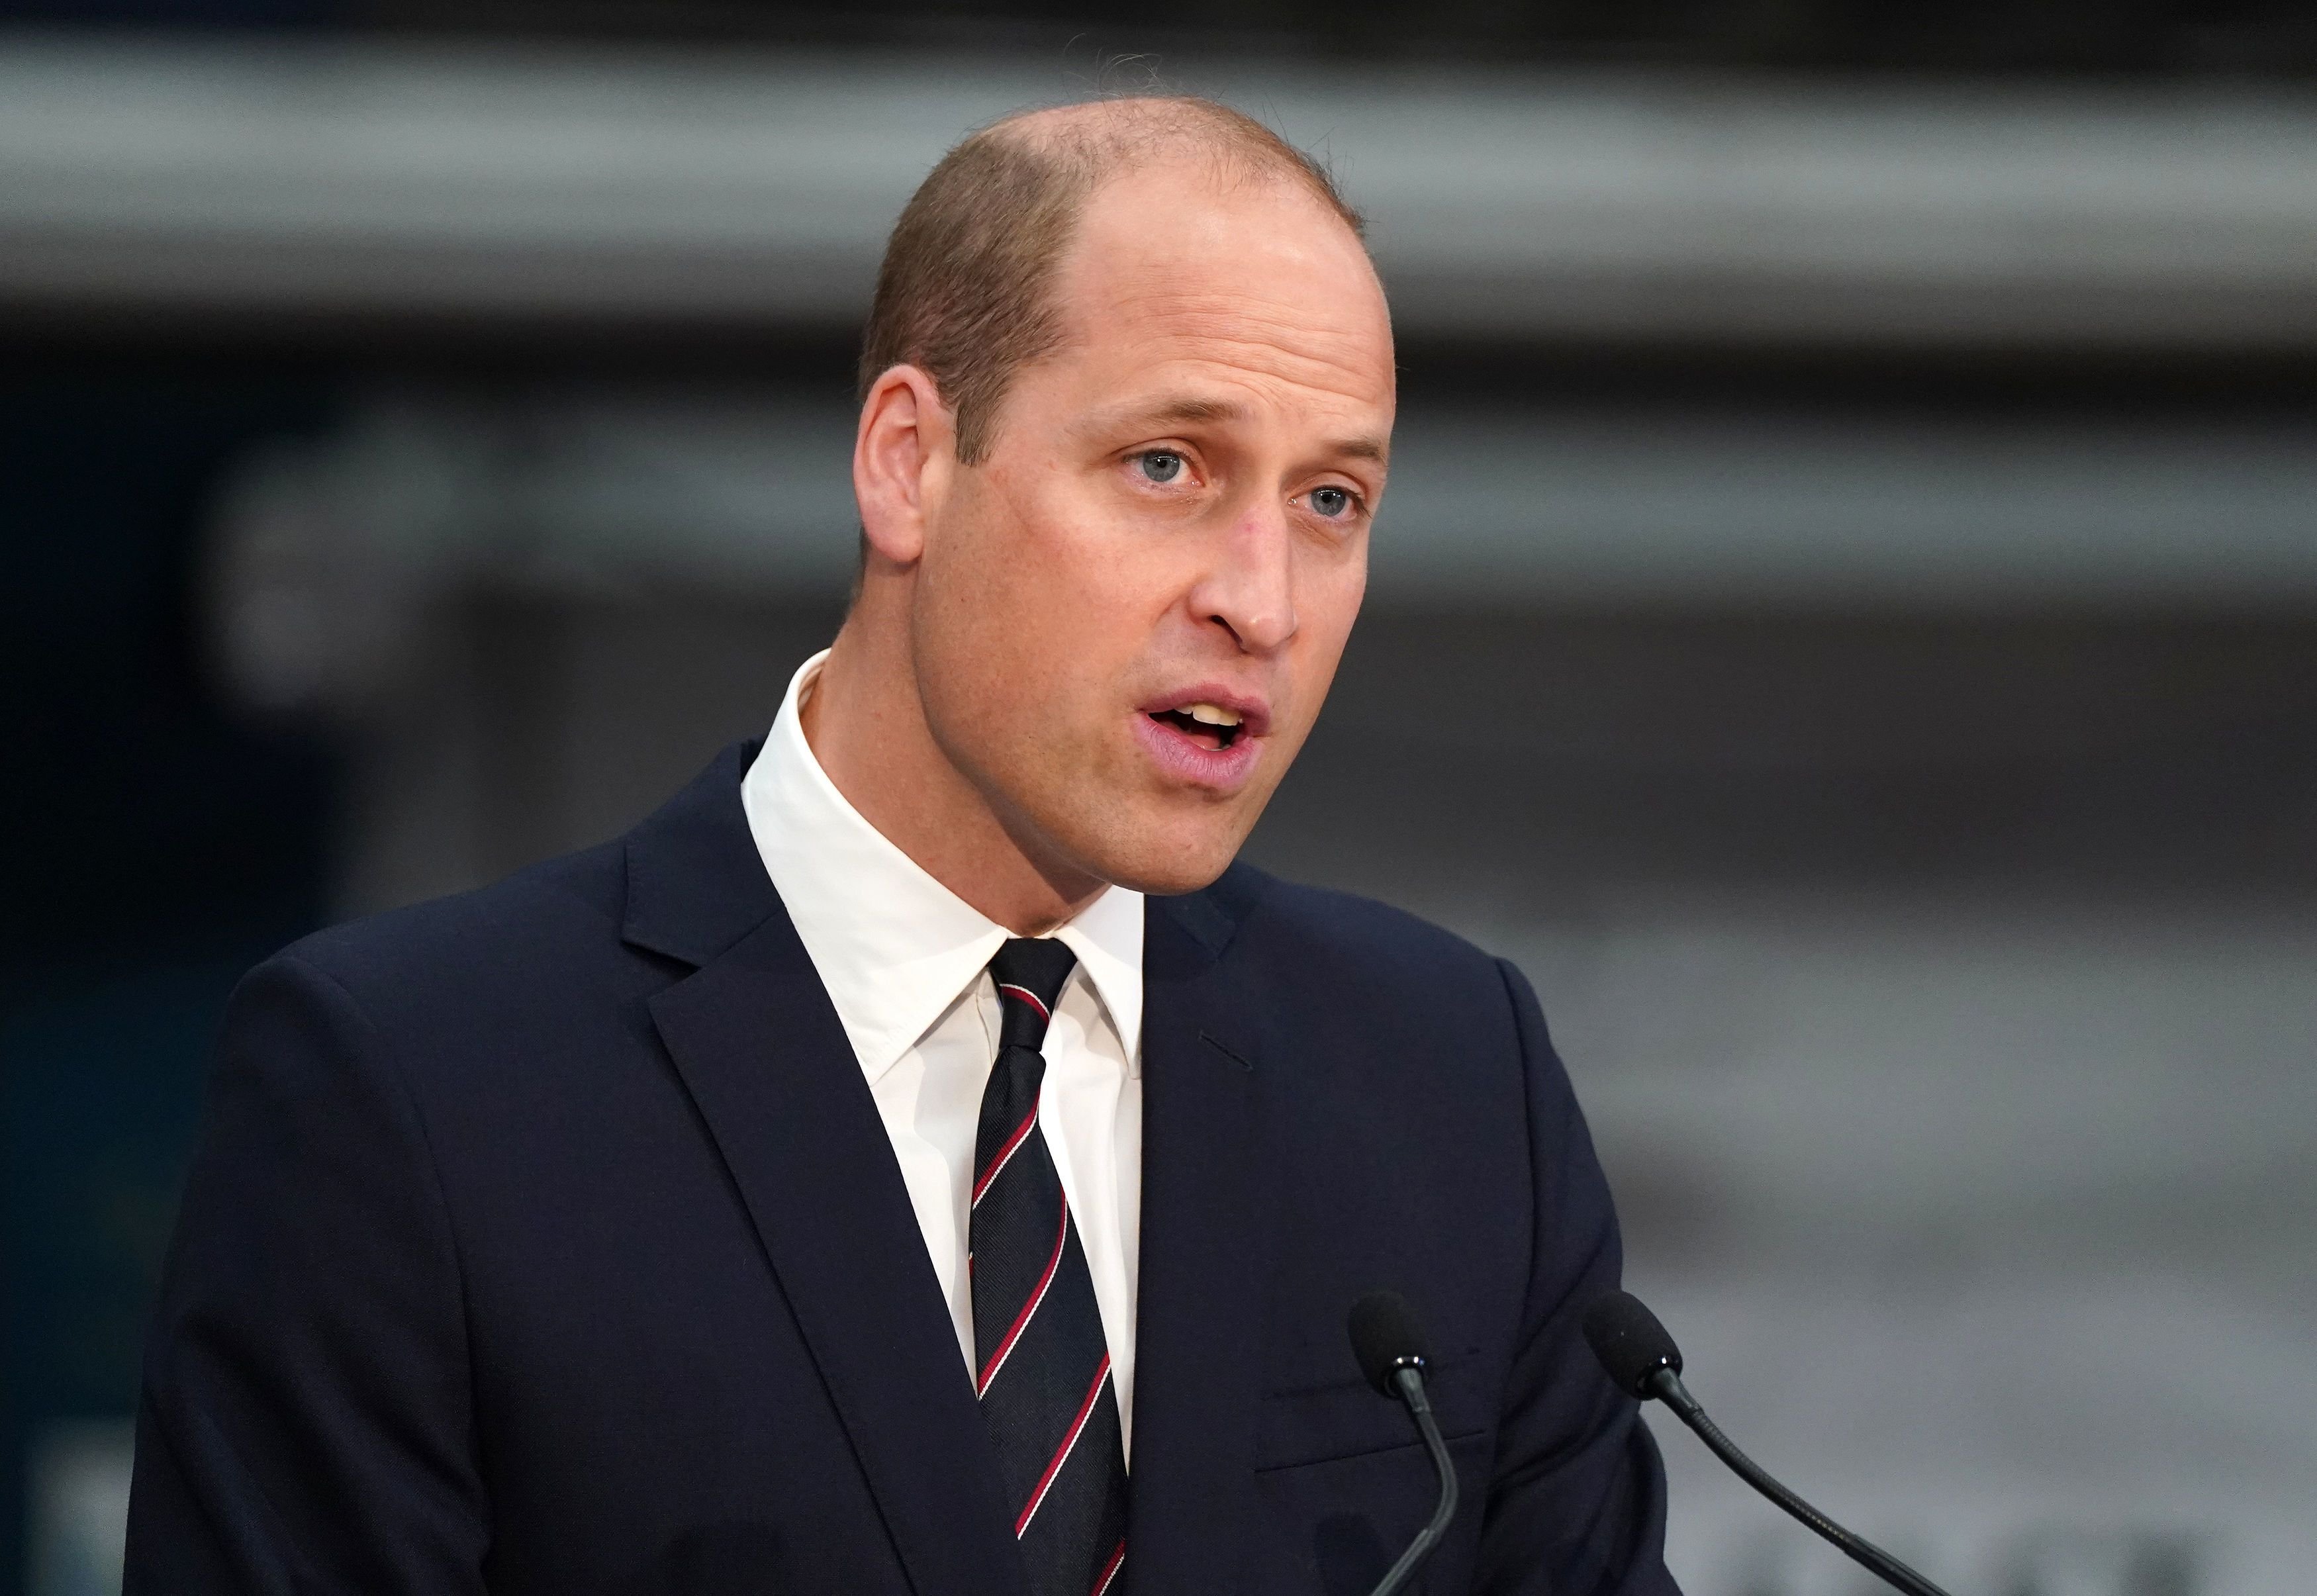 Prince William, the Earl of Strathearn visits the BAE Systems shipyard to observe the construction of HMS Glasgow on June 29, 2021, in Glasgow, Scotland | Photo: Andrew Milligan - WPA Pool/Getty Images